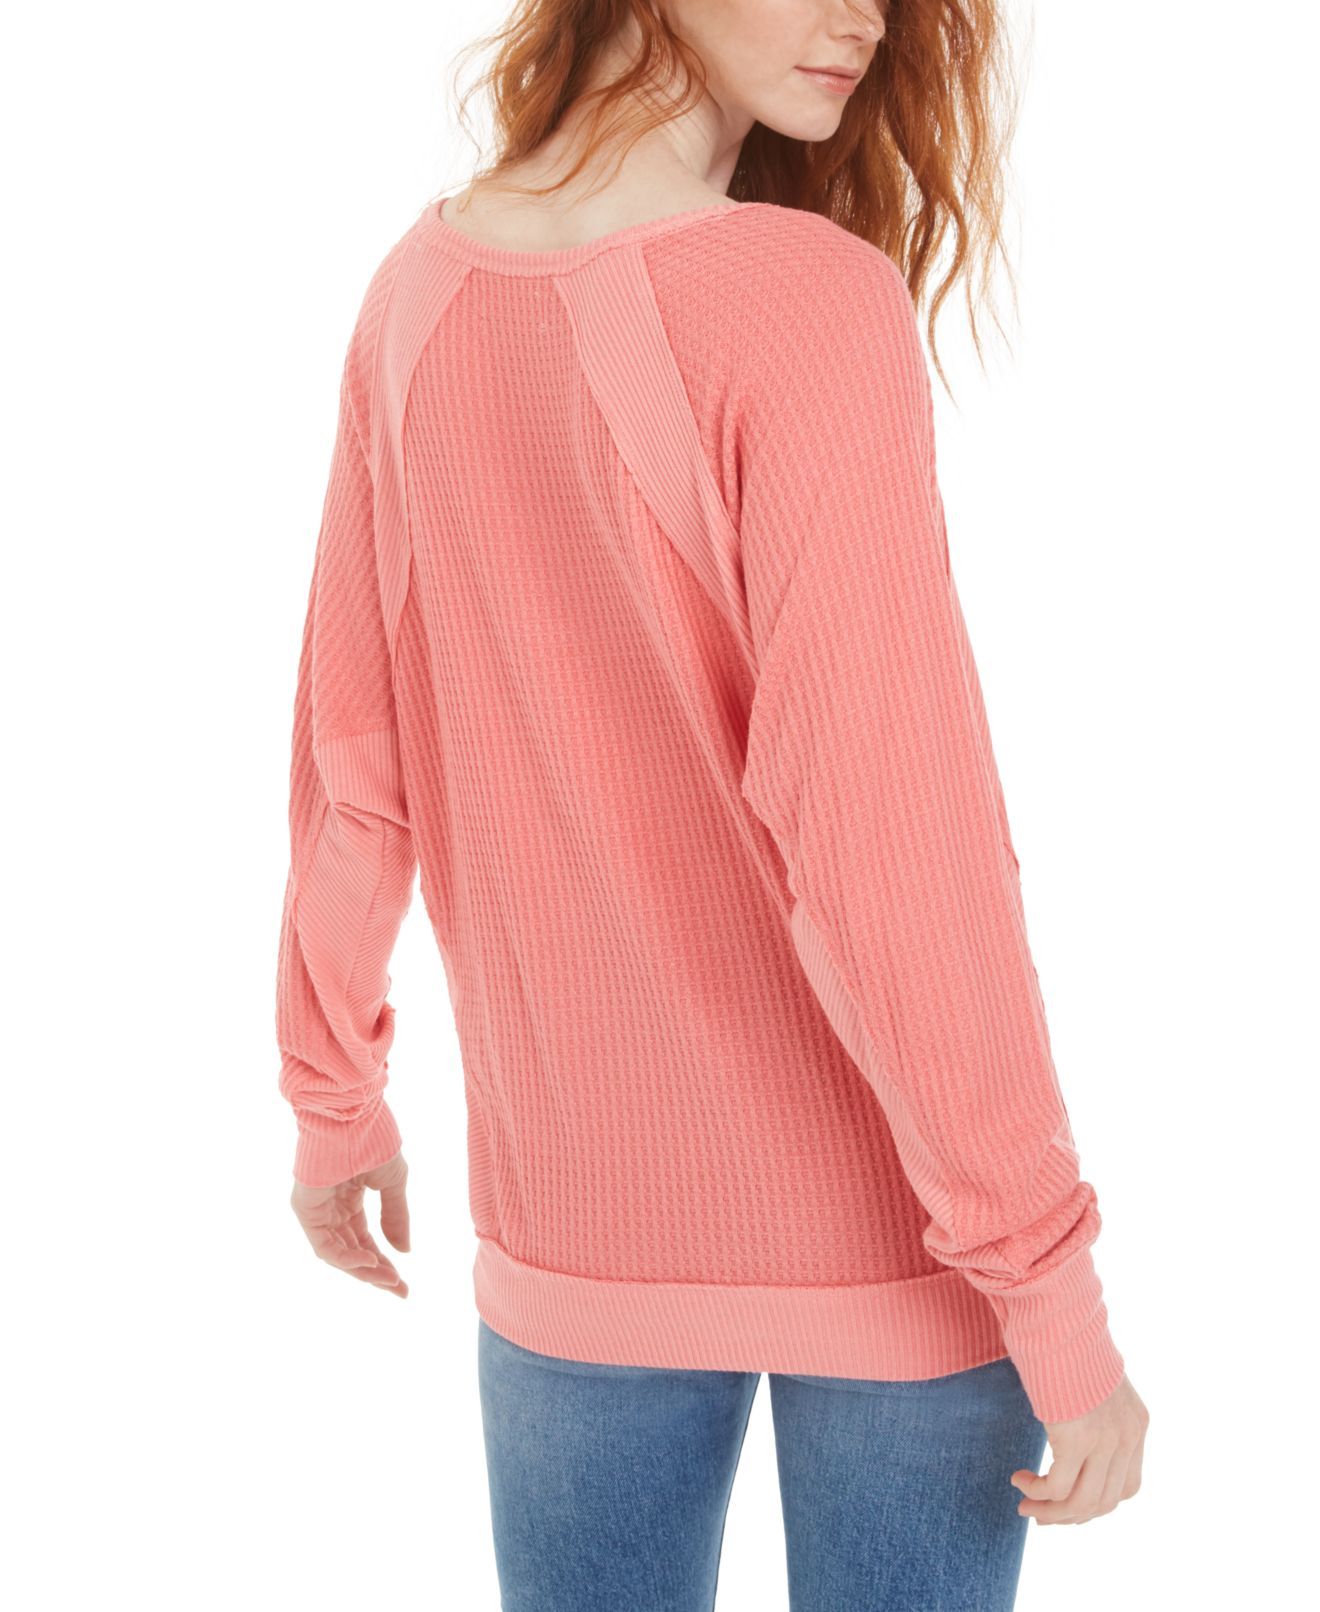 Color: Pinks Size Type: Regular Size (Women's): M Sleeve Length: Long Sleeve Type: Blouse Style: Basic Neckline: V-Neck Pattern: Solid Theme: Classic Material: Rayon